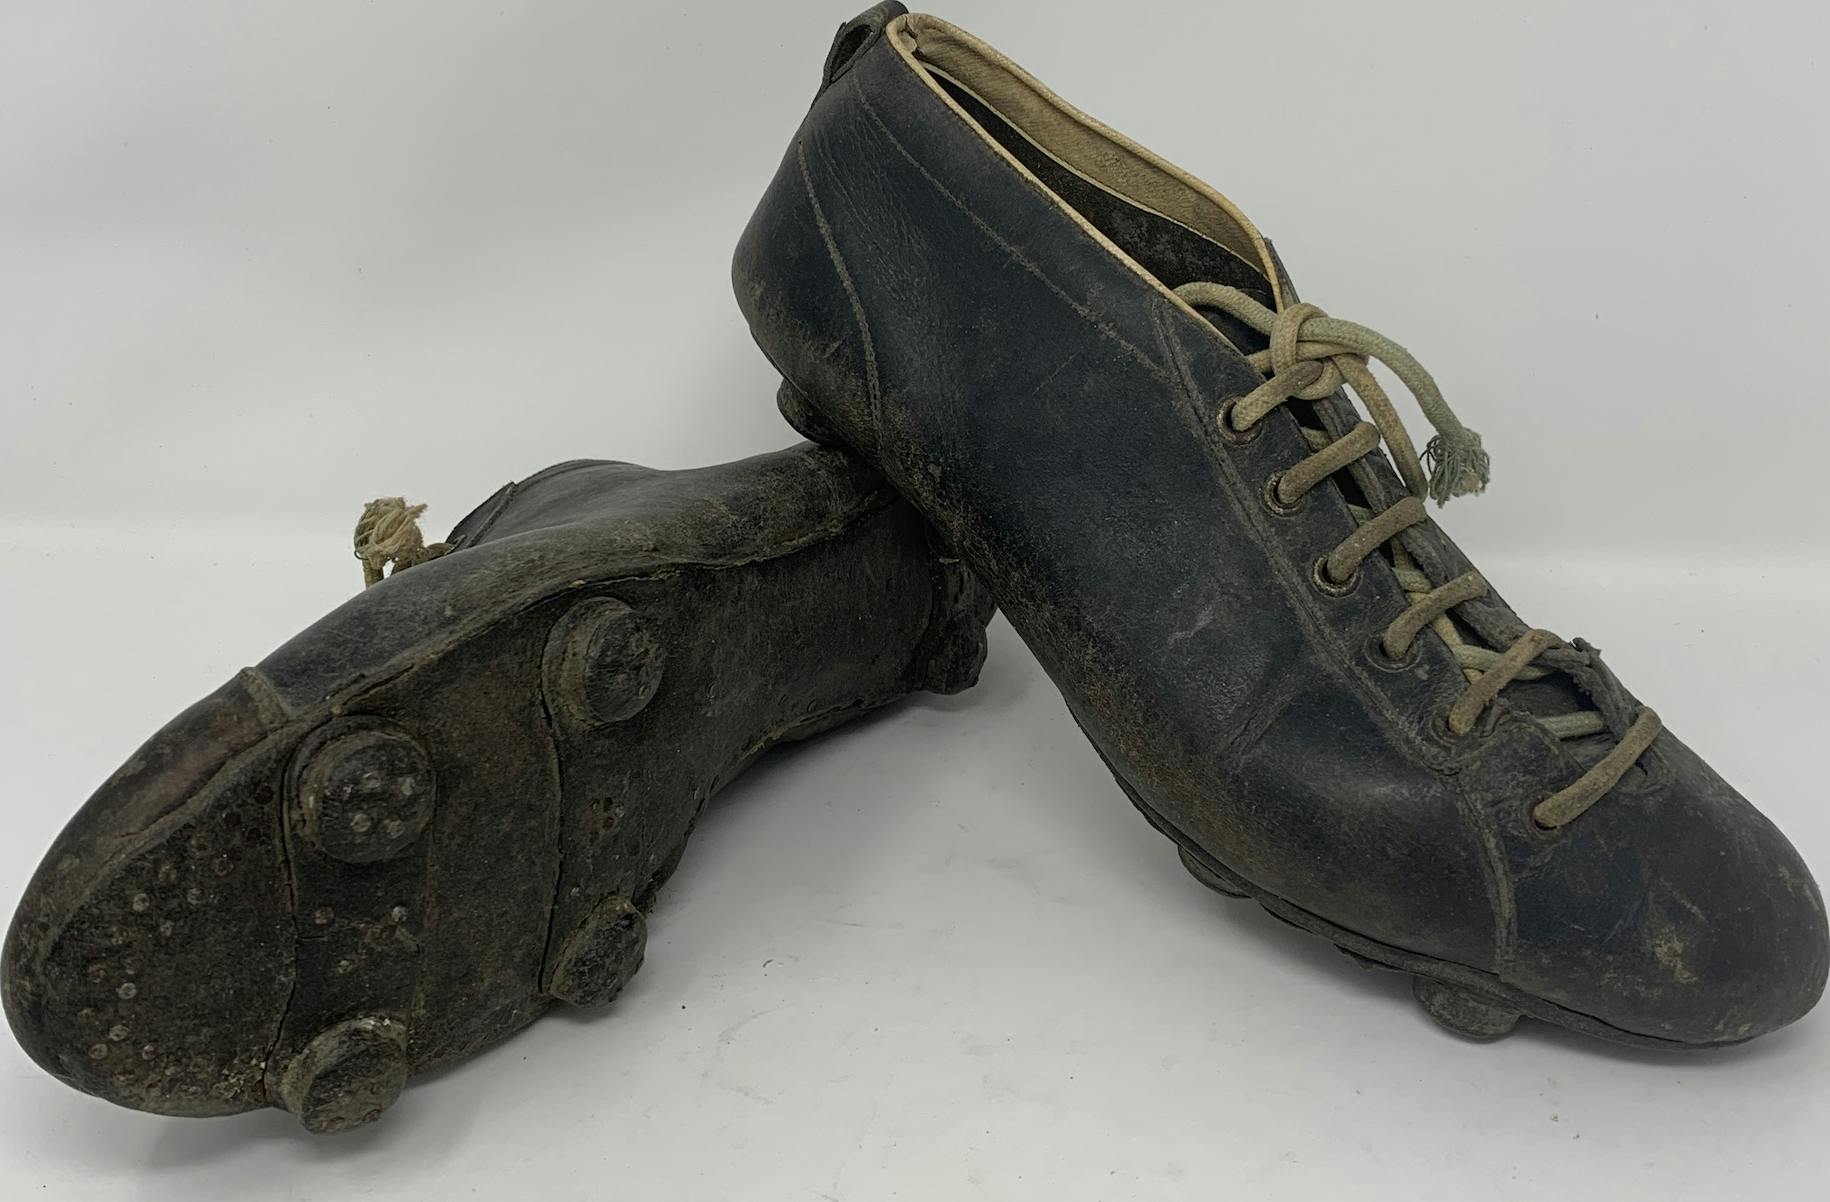 Handcrafted Soccer’s Shoes from FIFA World Cup France 1938, 1930 - 1940, H. max 11 cm; L. 28,5 x 9,5 cm